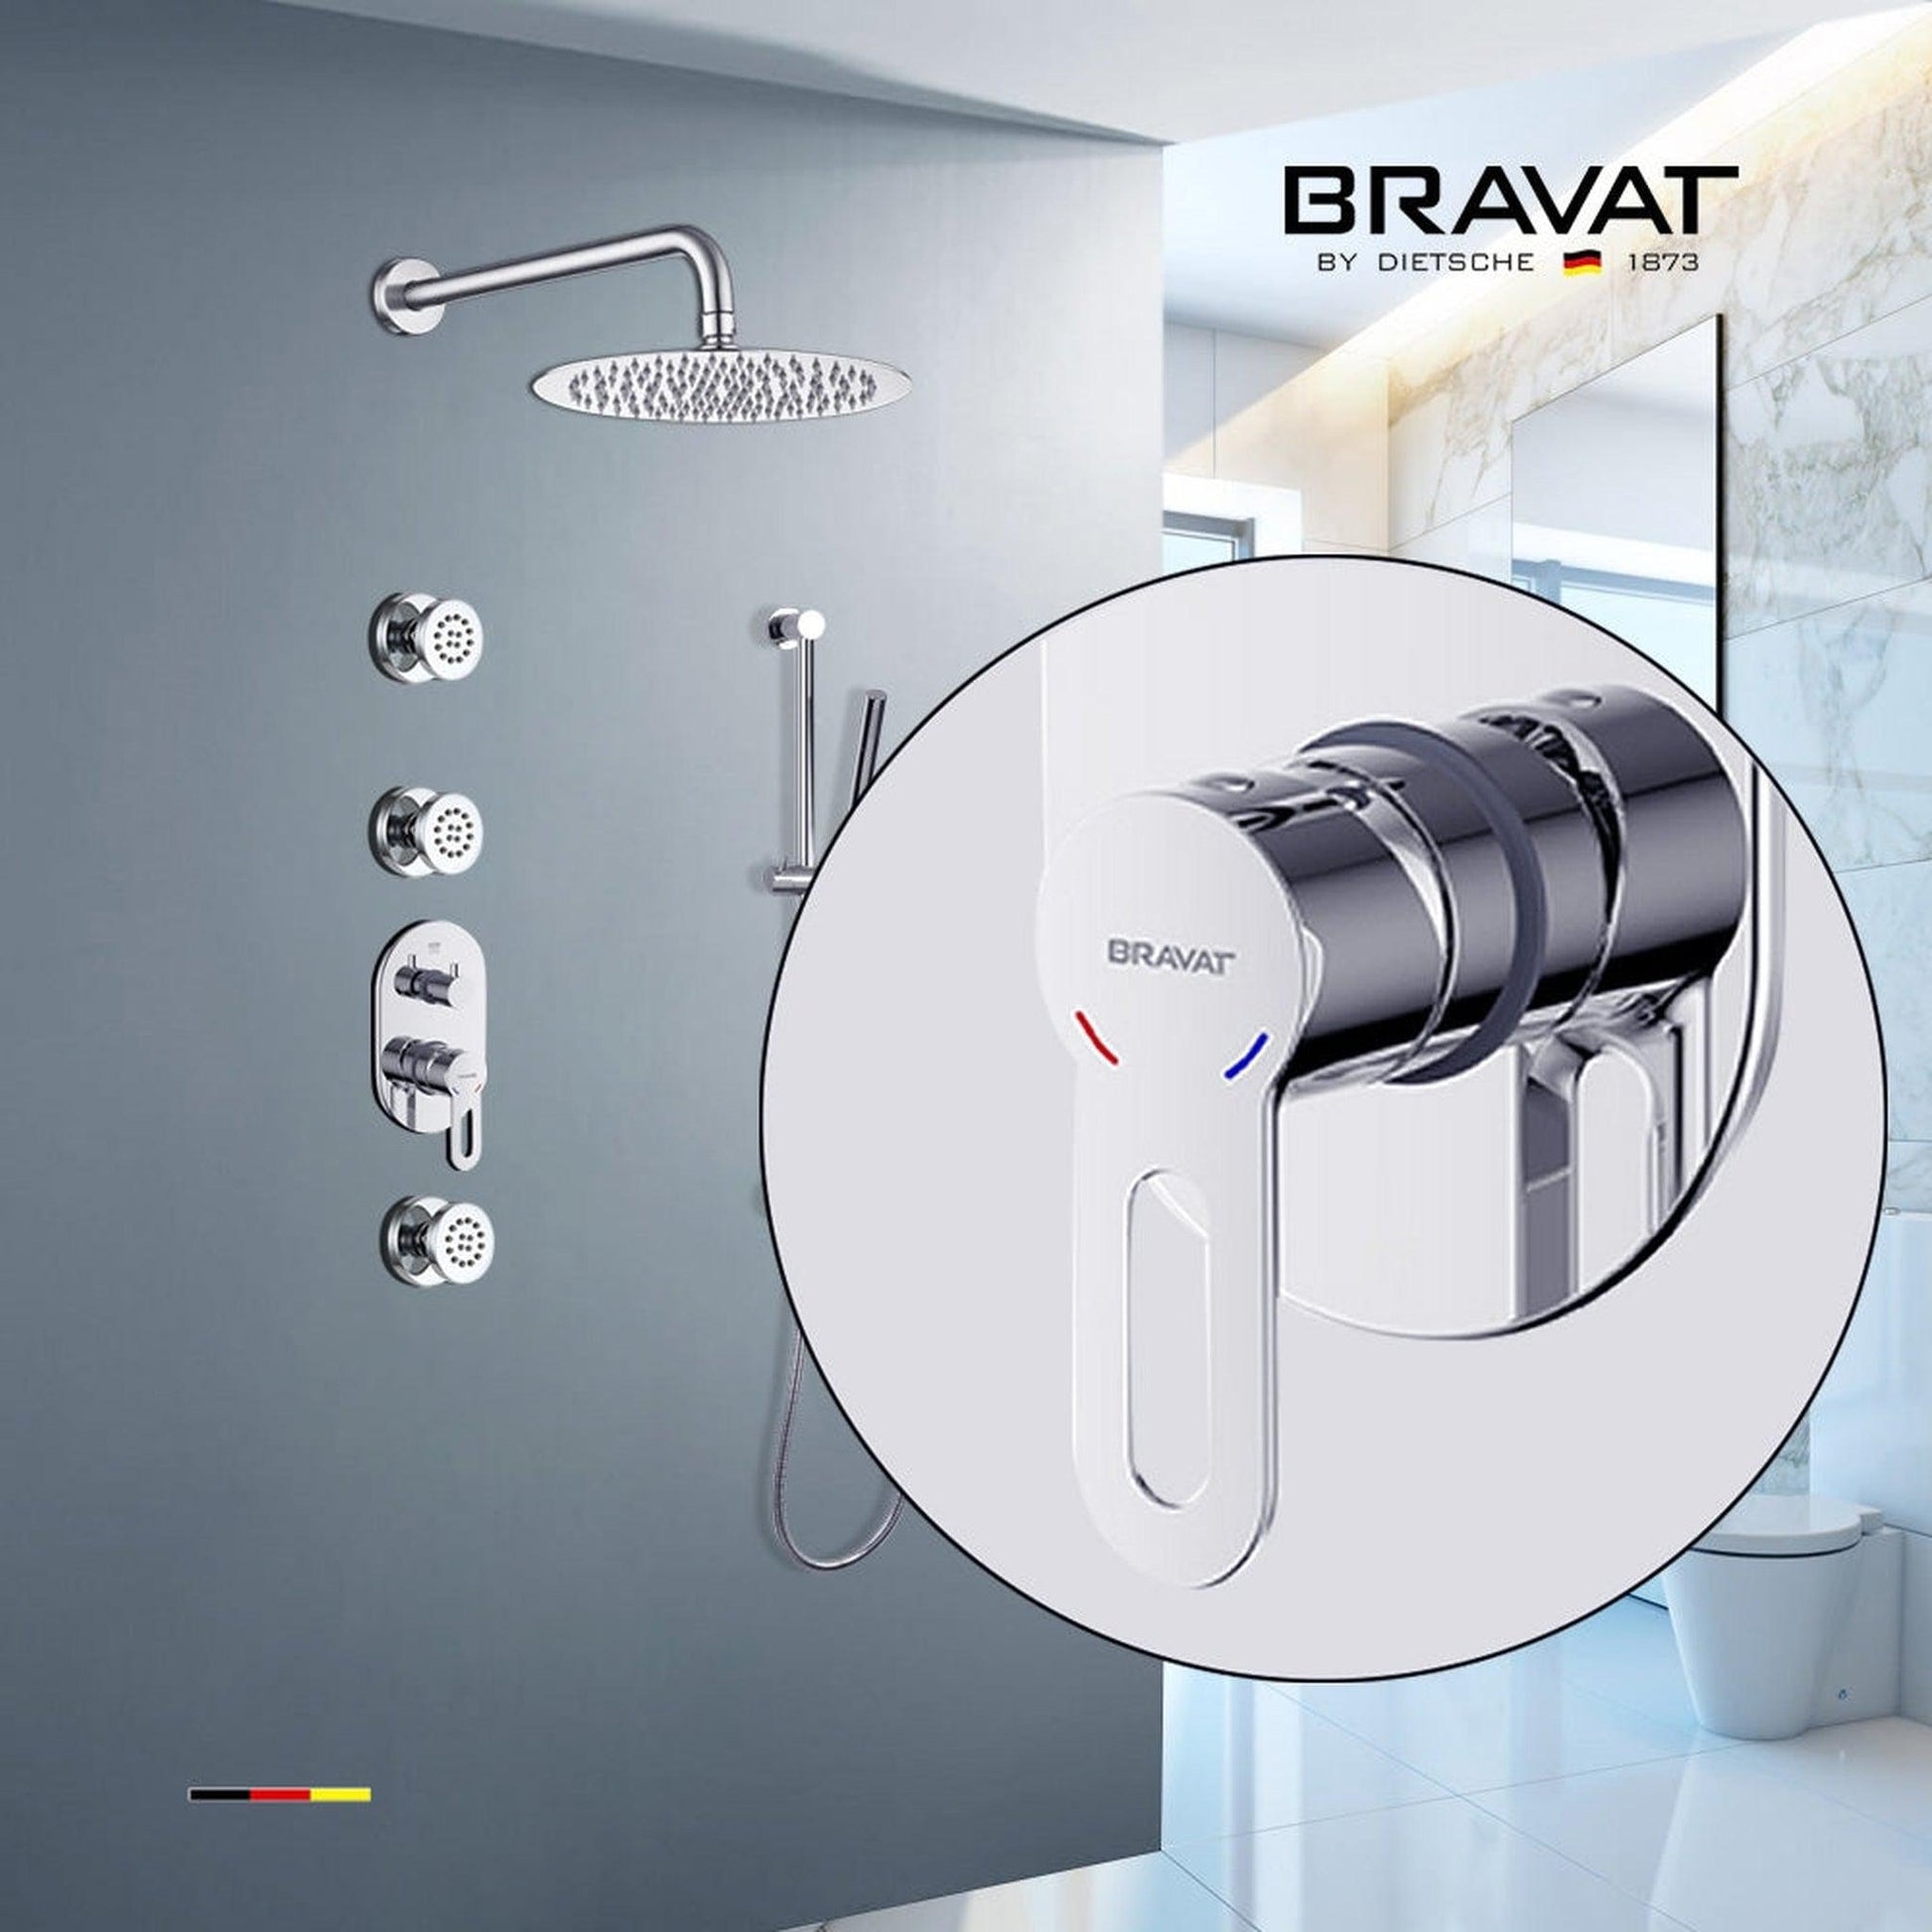 Fontana Bravat 10" Chrome Wall Mounted Thermostatic Rainfall Shower System With 3-Jet Body Sprays and Hand Shower